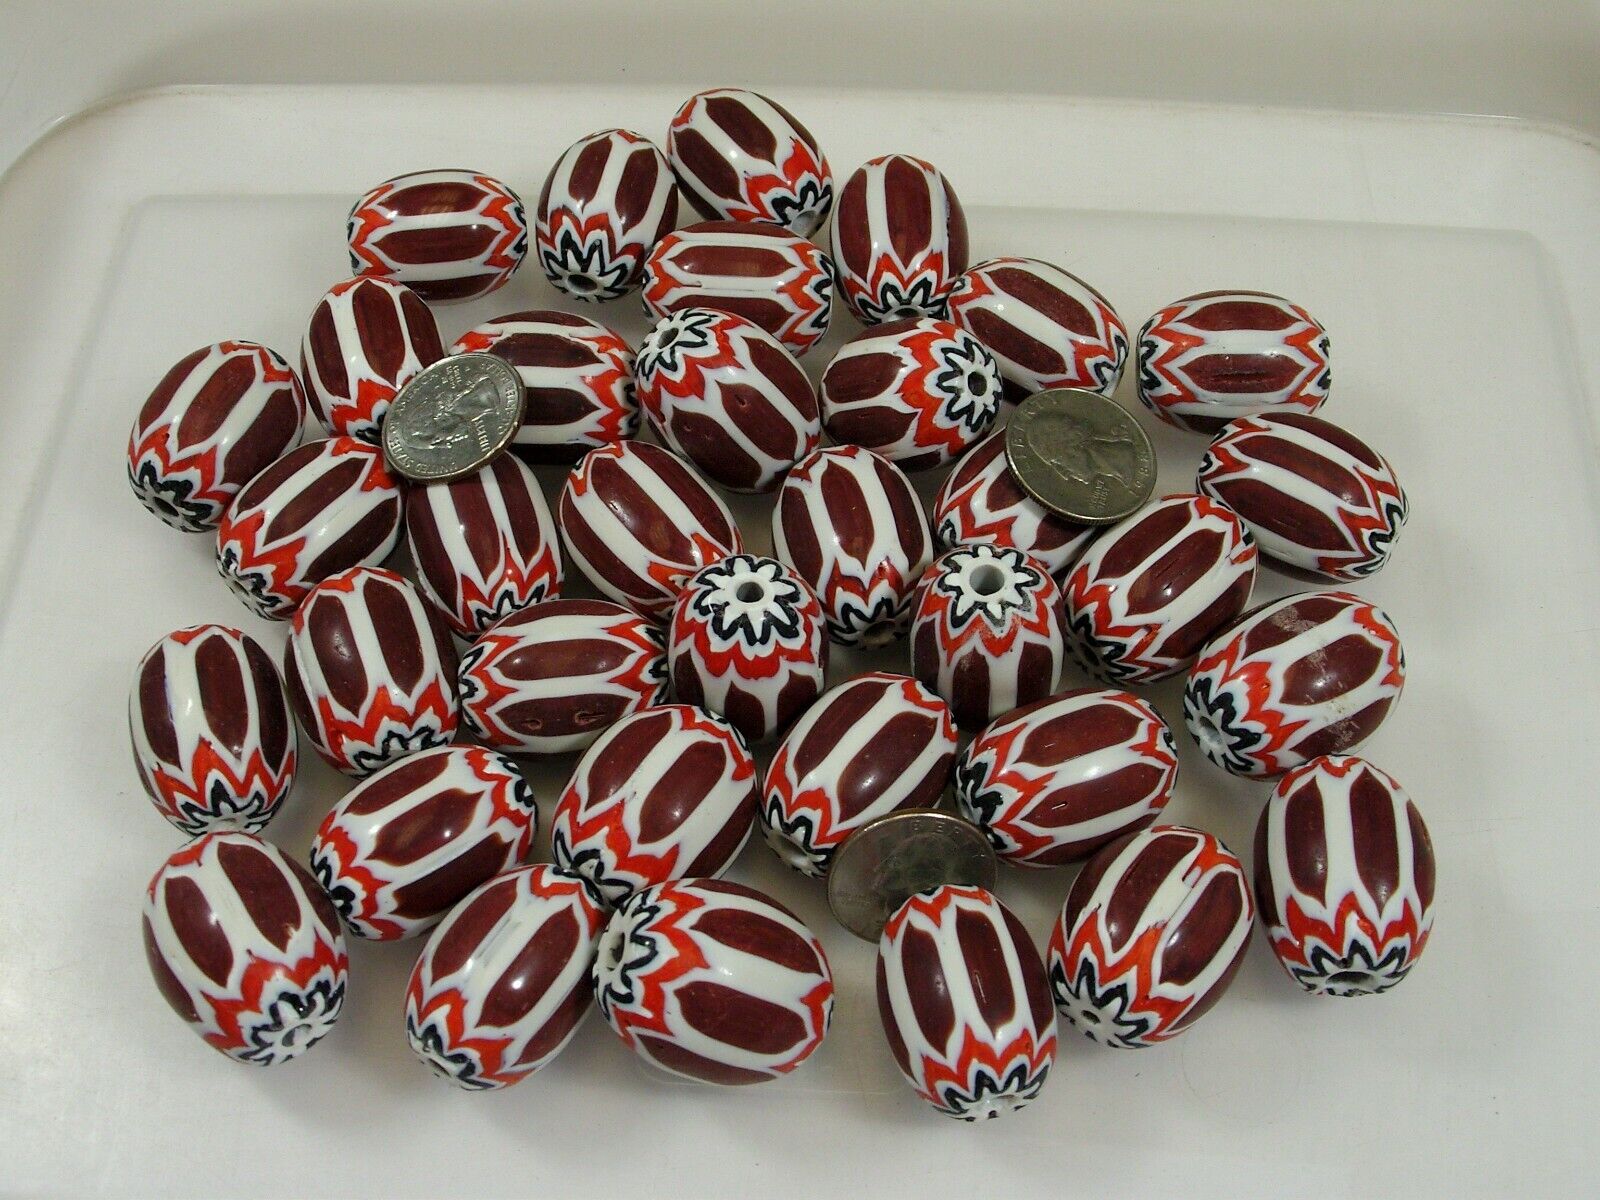 30 Pieces Large India Handmade Replica African Trade Chevron Beads Lot (MM-5)